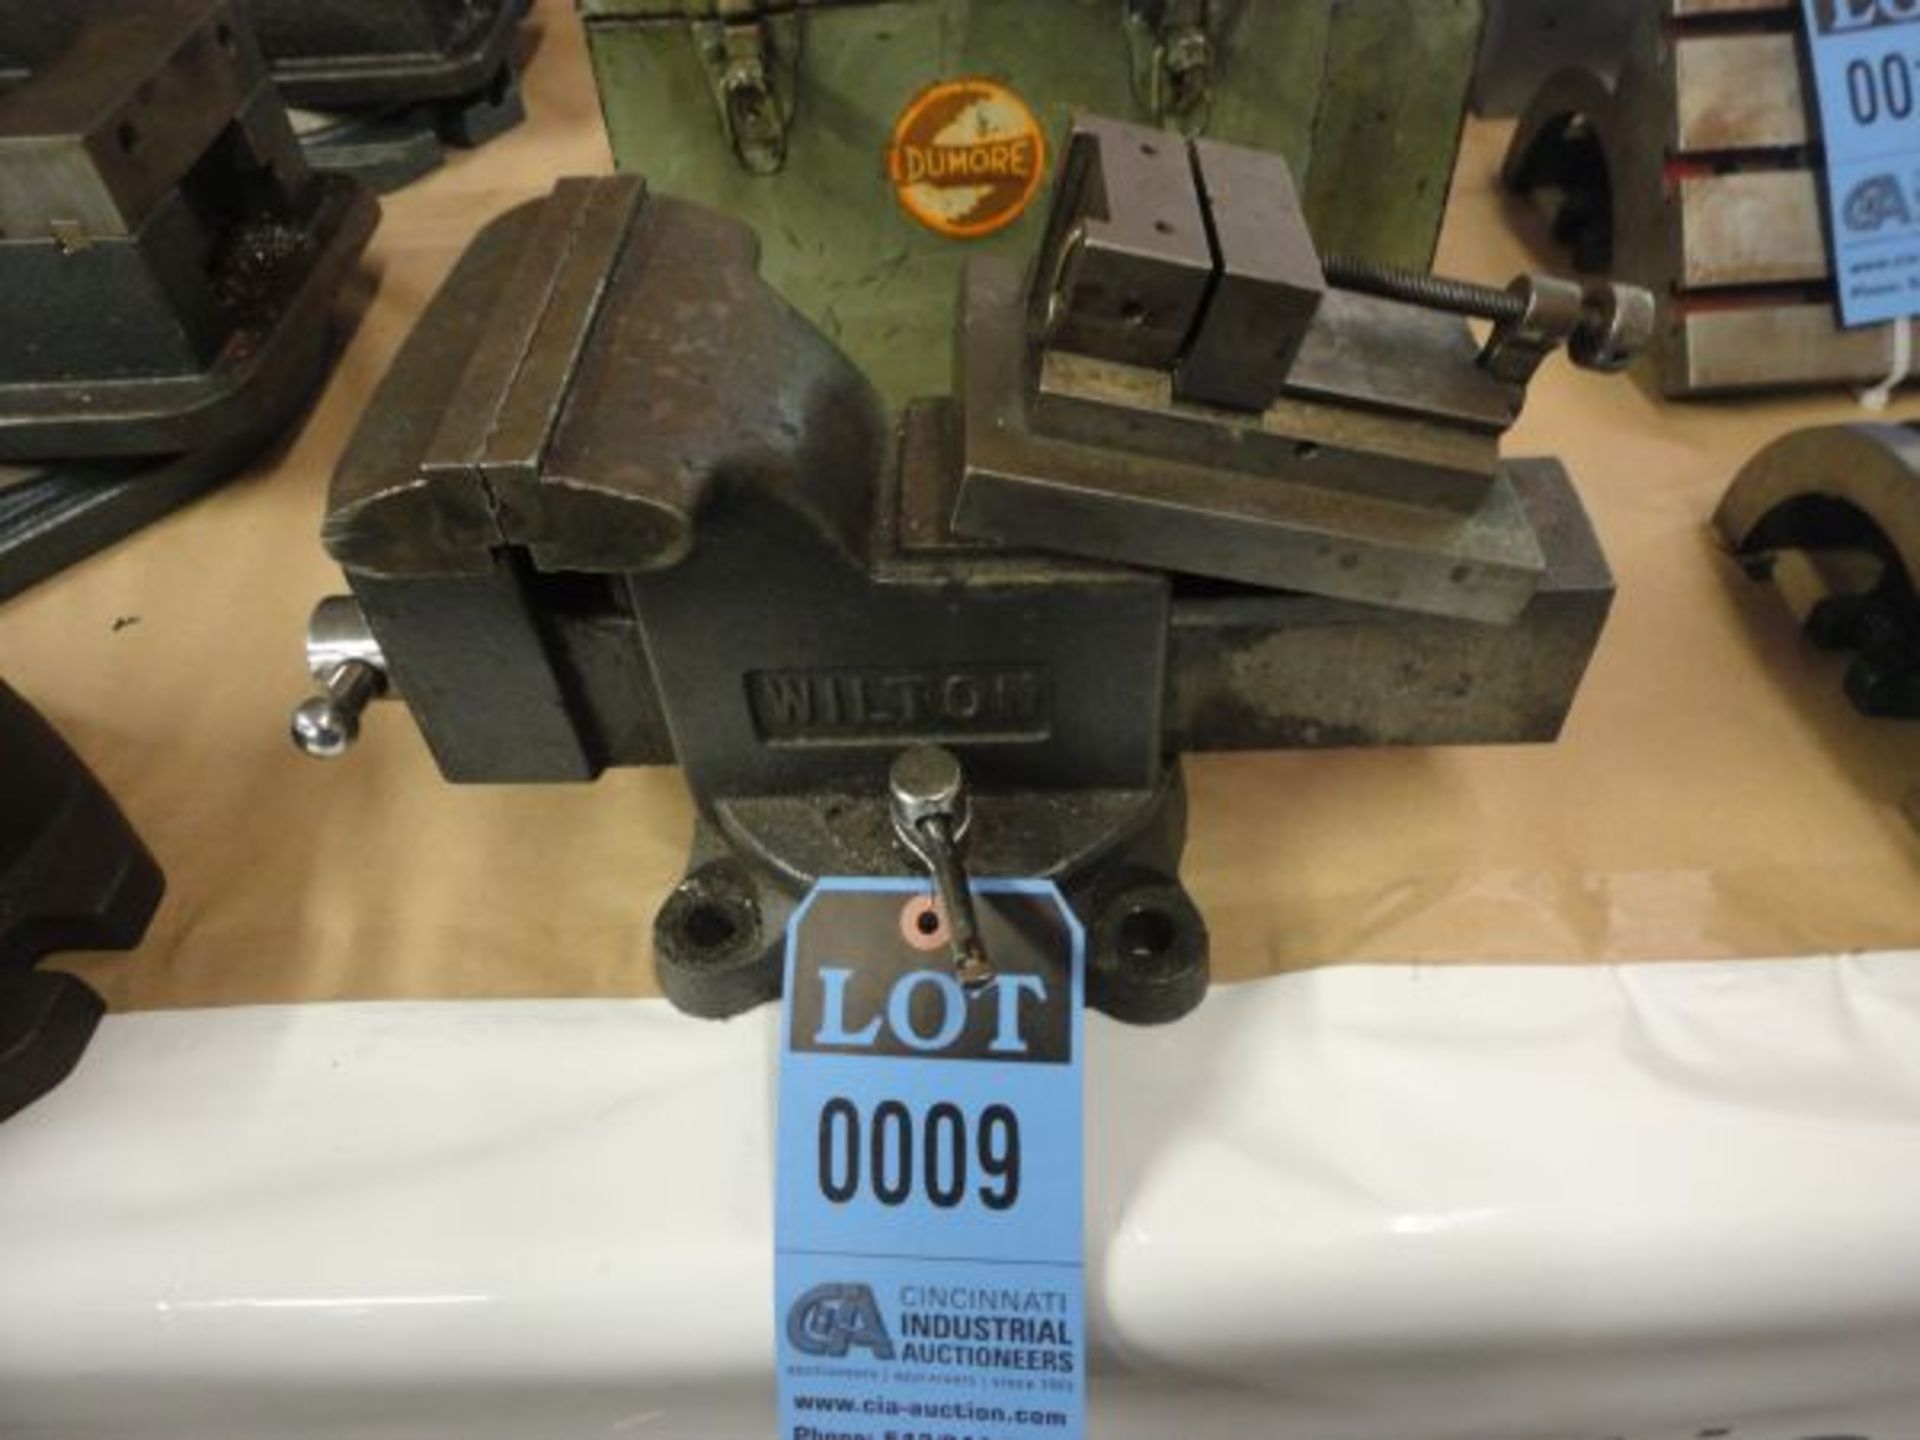 5" WILSON BENCH VISE WITH 2-1/2" PRECISION VISE